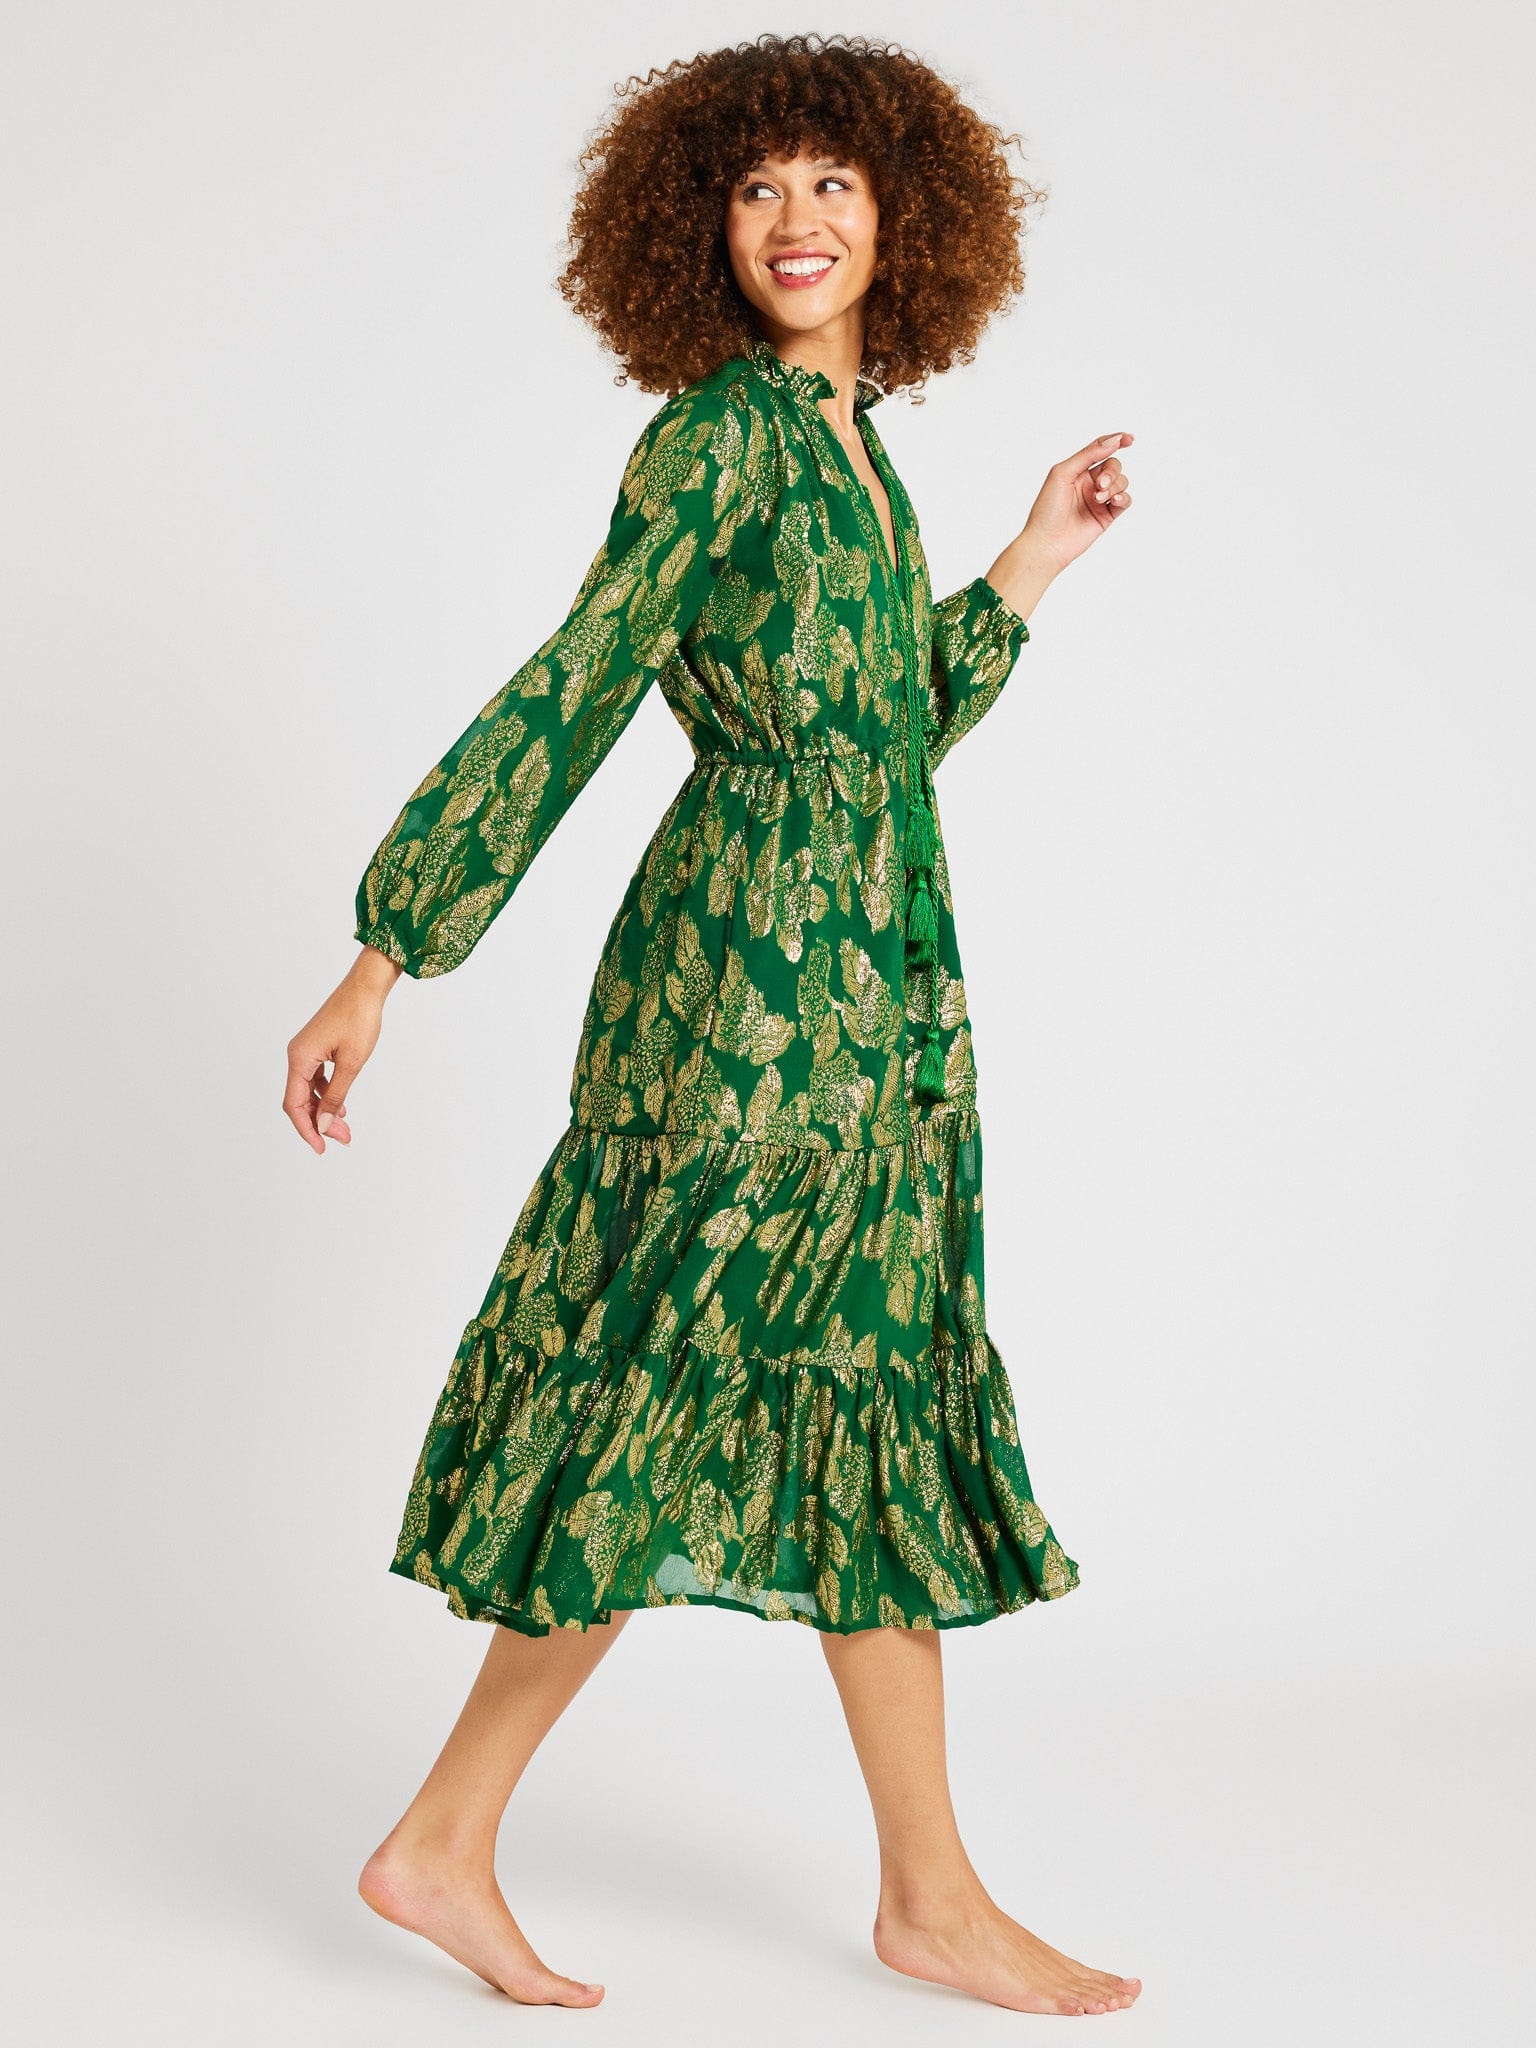 MILLE Clothing Astrid Dress in Malachite Shimmer